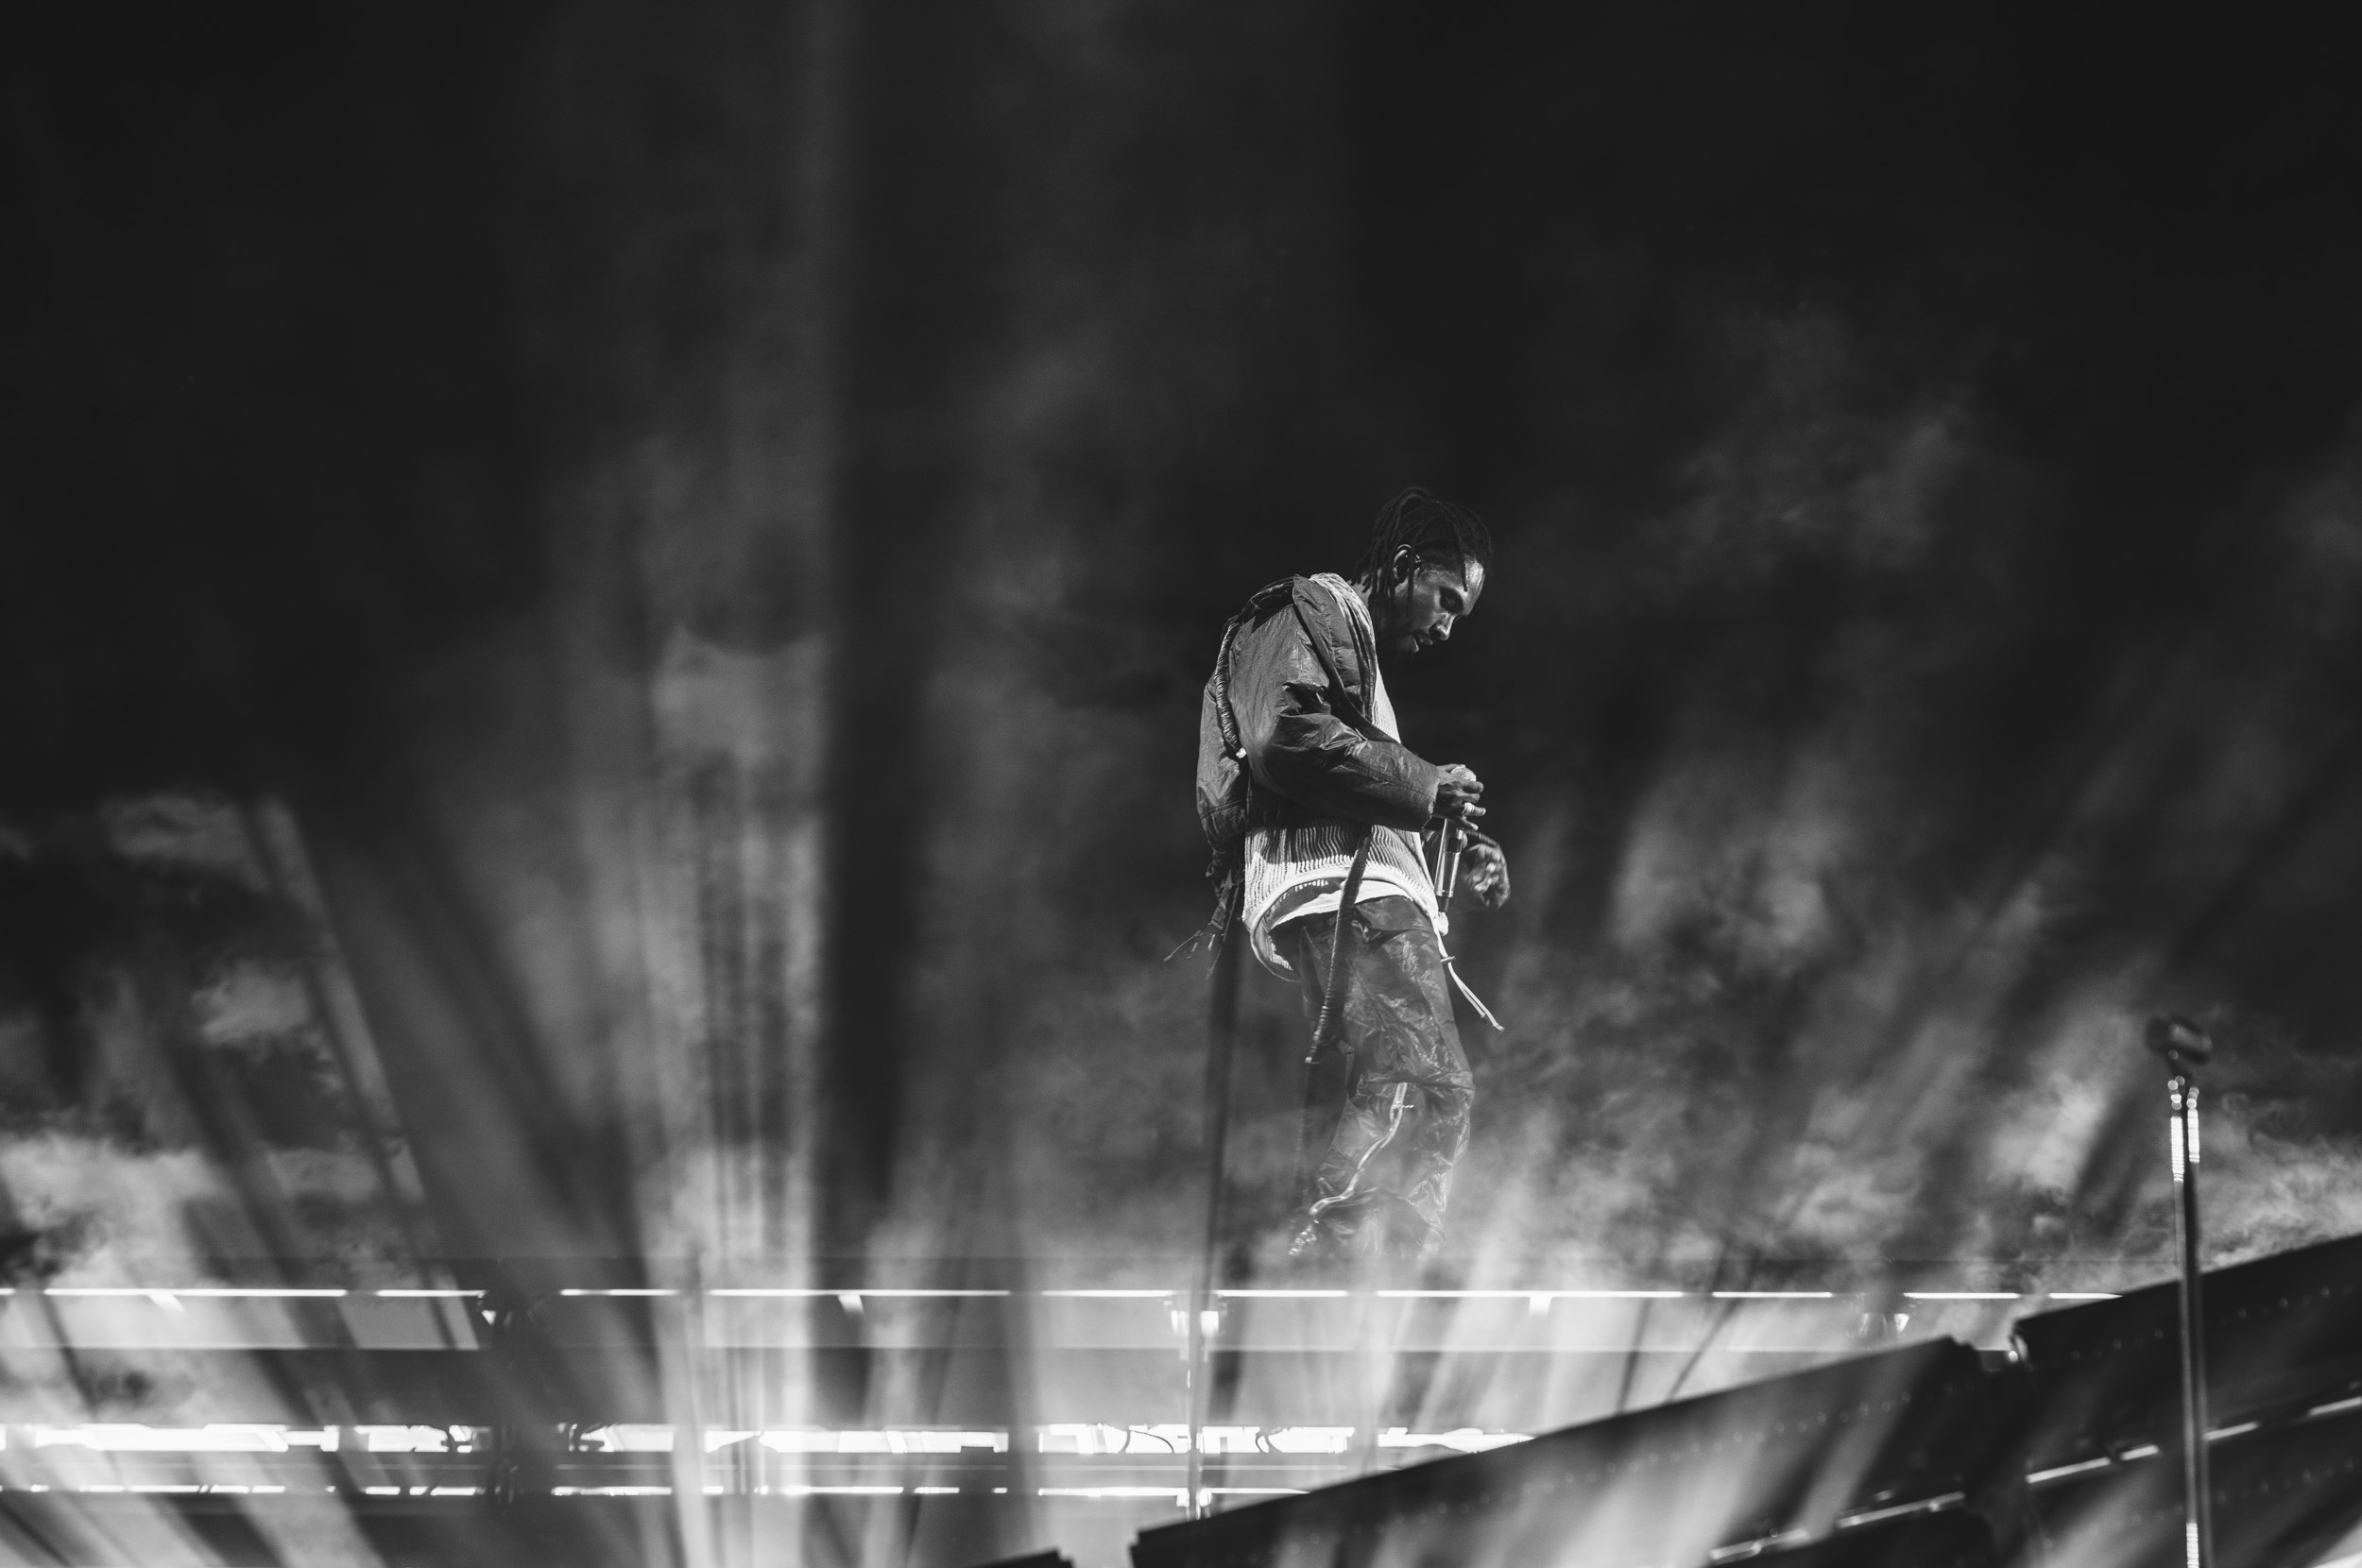 Miguel at Coachella 2018 - photographed with a Sony a7R III - Sigma 85mm f/1.4 Art - Sigma MC‑11 Mount Converter